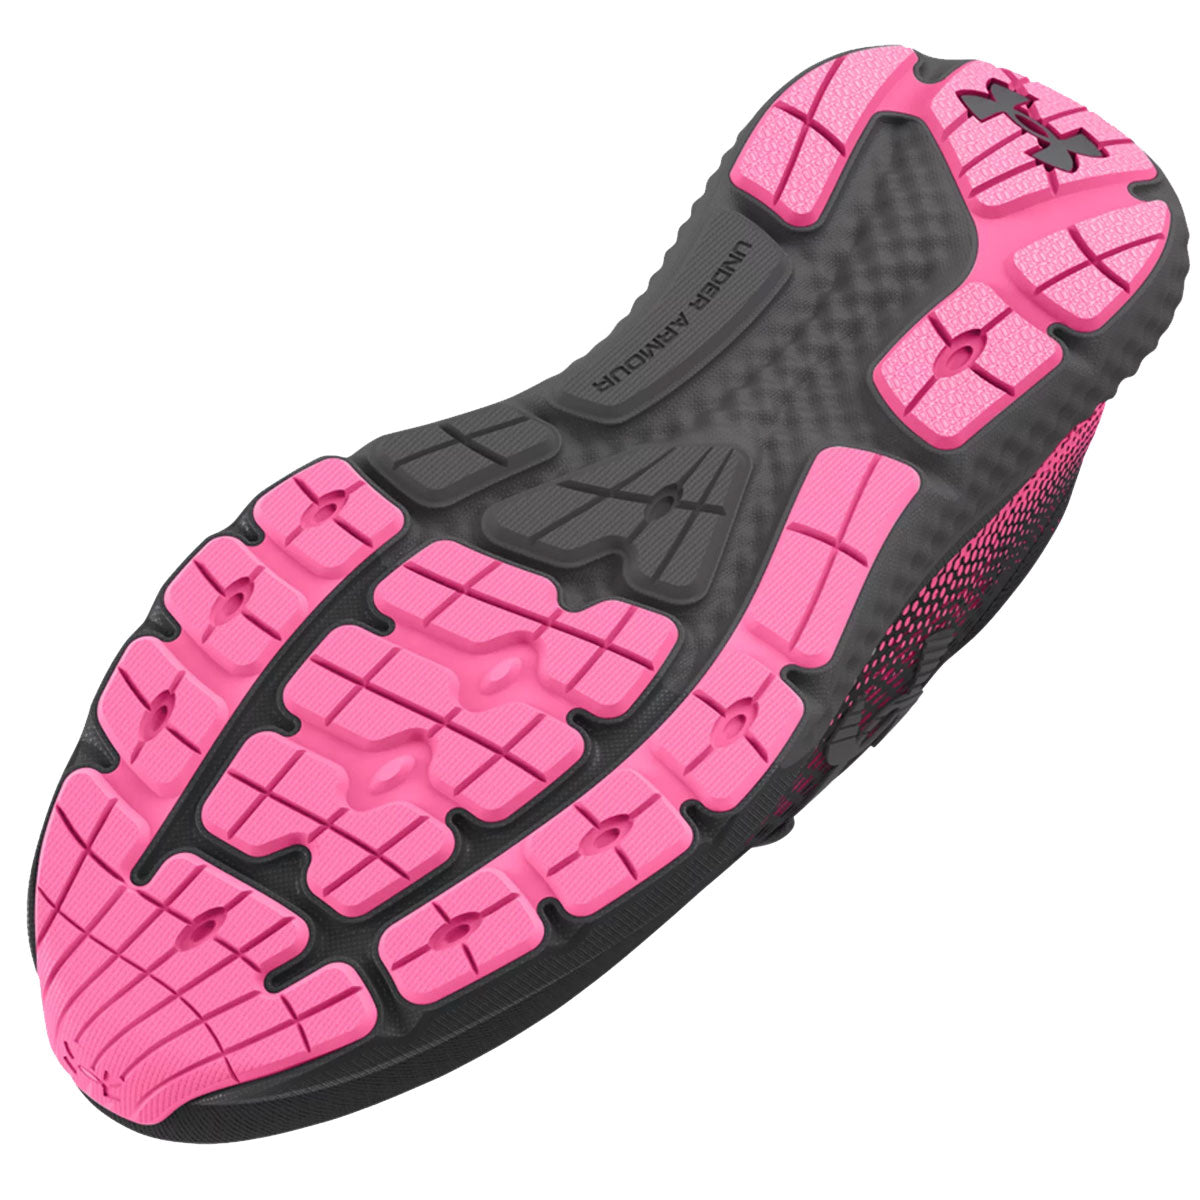 Under Armour Charged Rogue 4 Running Shoes - Womens - Anthracite/Fluo Pink/Castlerock